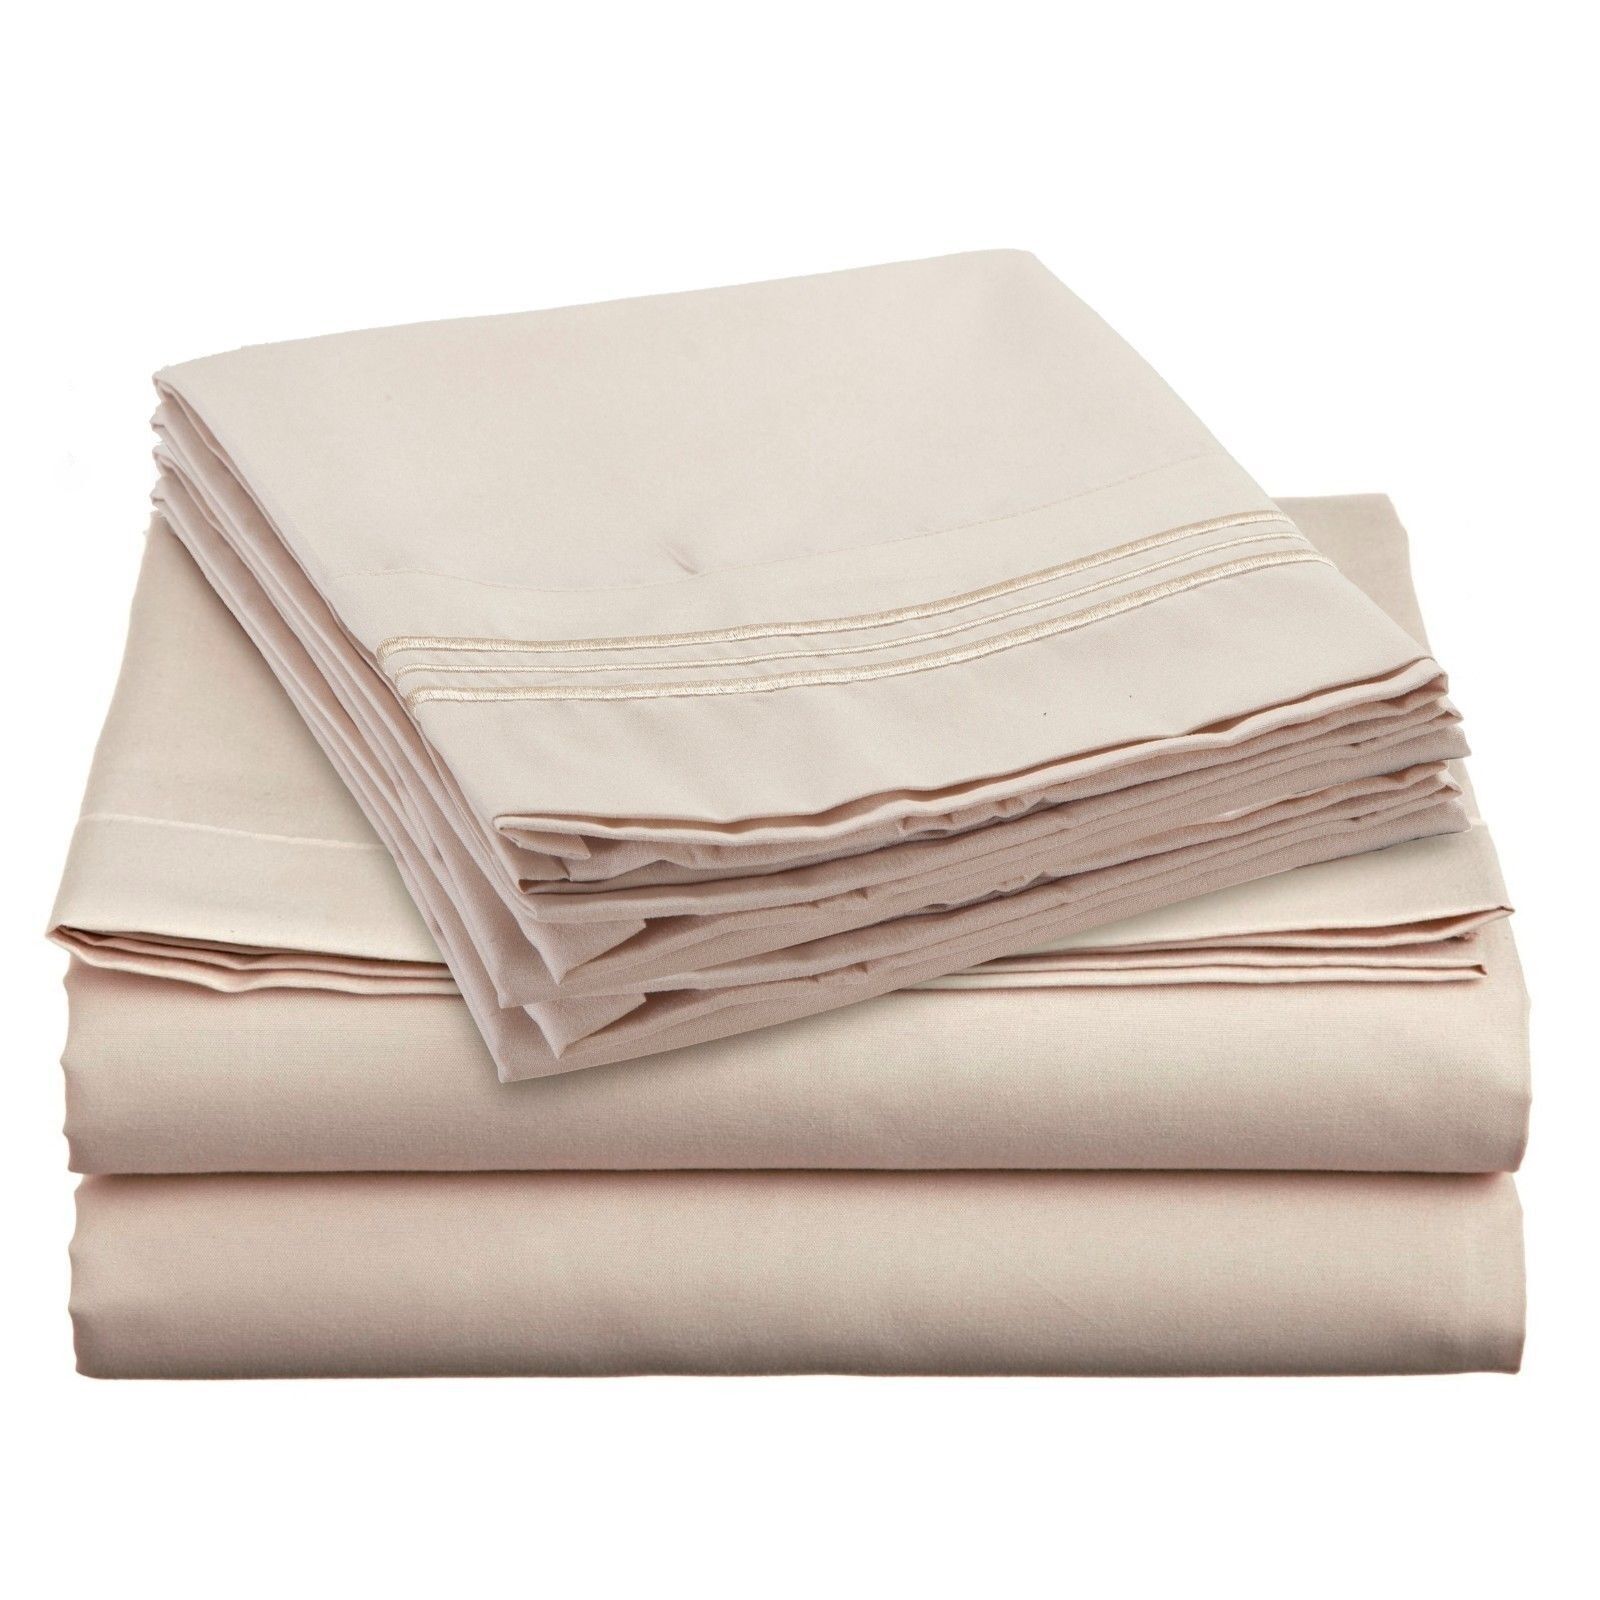 Bed Sheets - Deep Pocket Bed Sheets- 4 Piece Set, Queen, King, Twin, or Full Size - Twin / Beige Cream